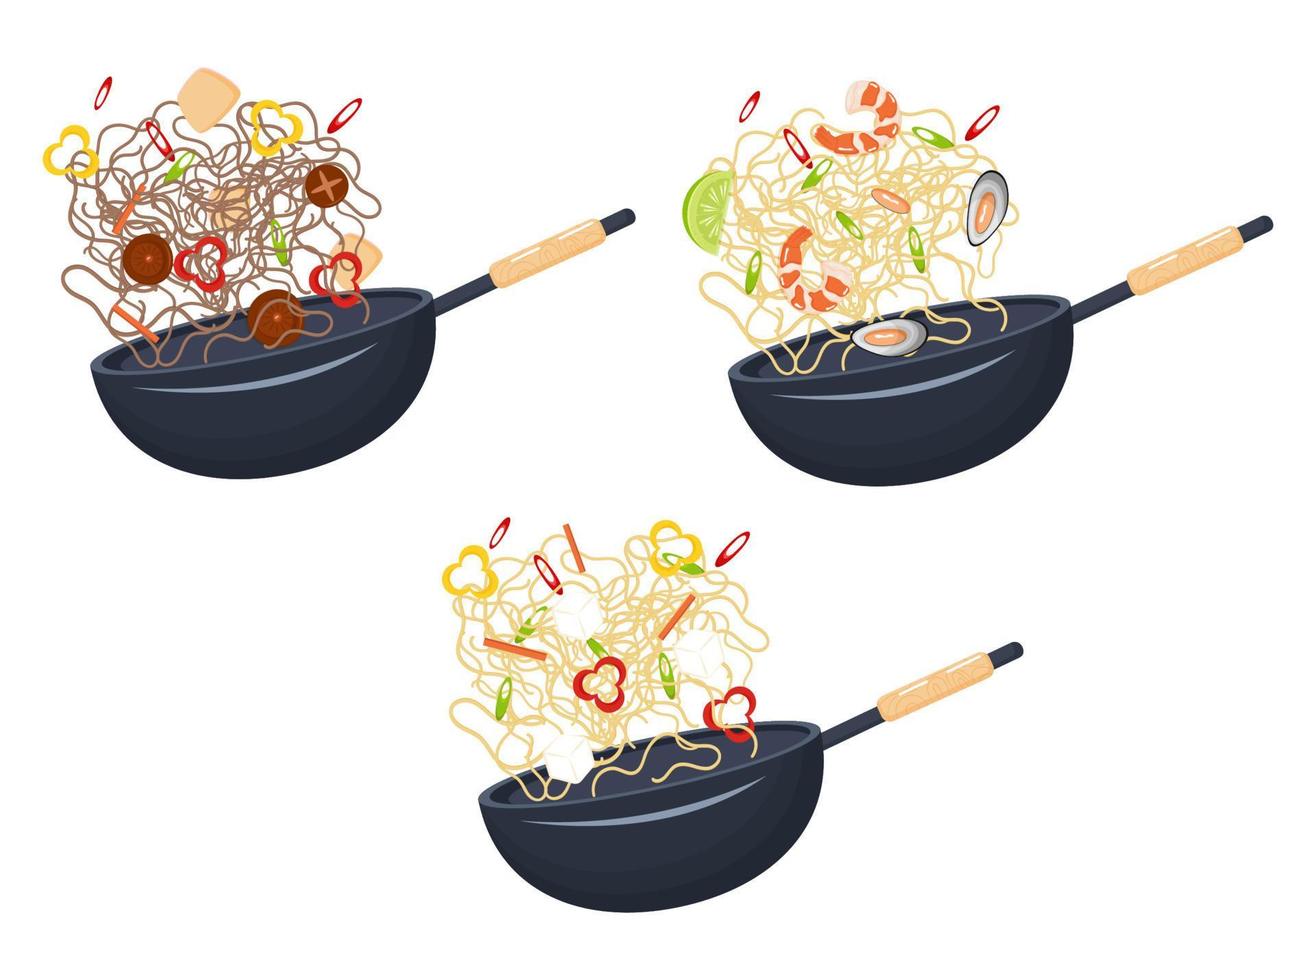 Chinese noodles with different fillings in wok pan. Vector illustration set.